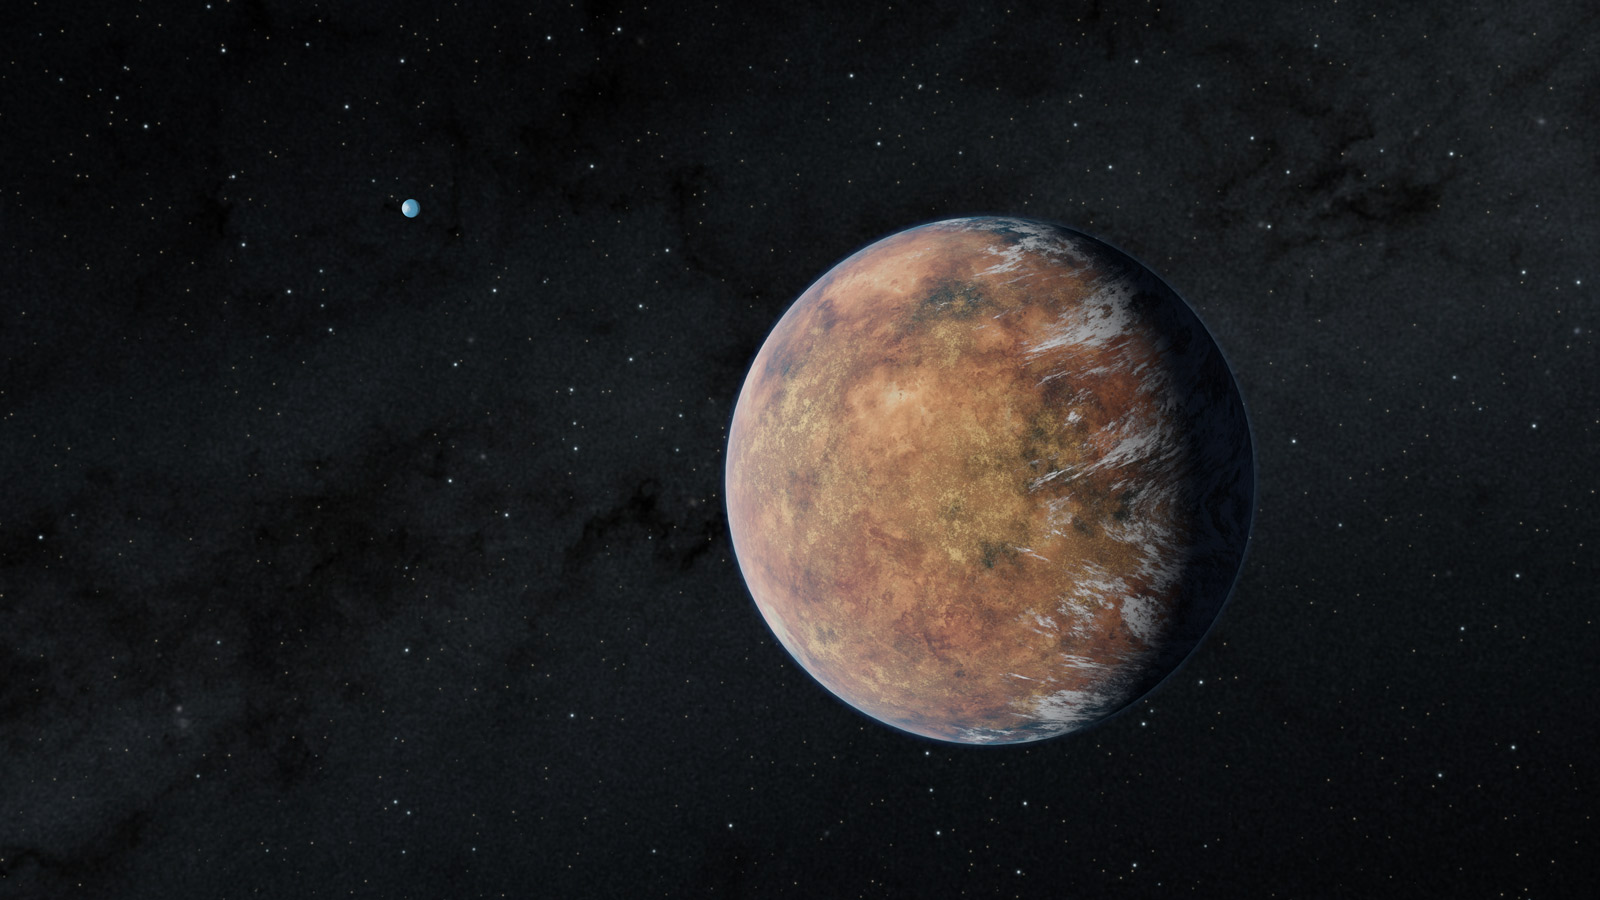 slide 3 - An illustration shows a brownish, rocky exoplanet just right of center. Bright clouds can be seen at the right of the planet, indicating that they could be present on the side of the planet not facing the unseen star. 